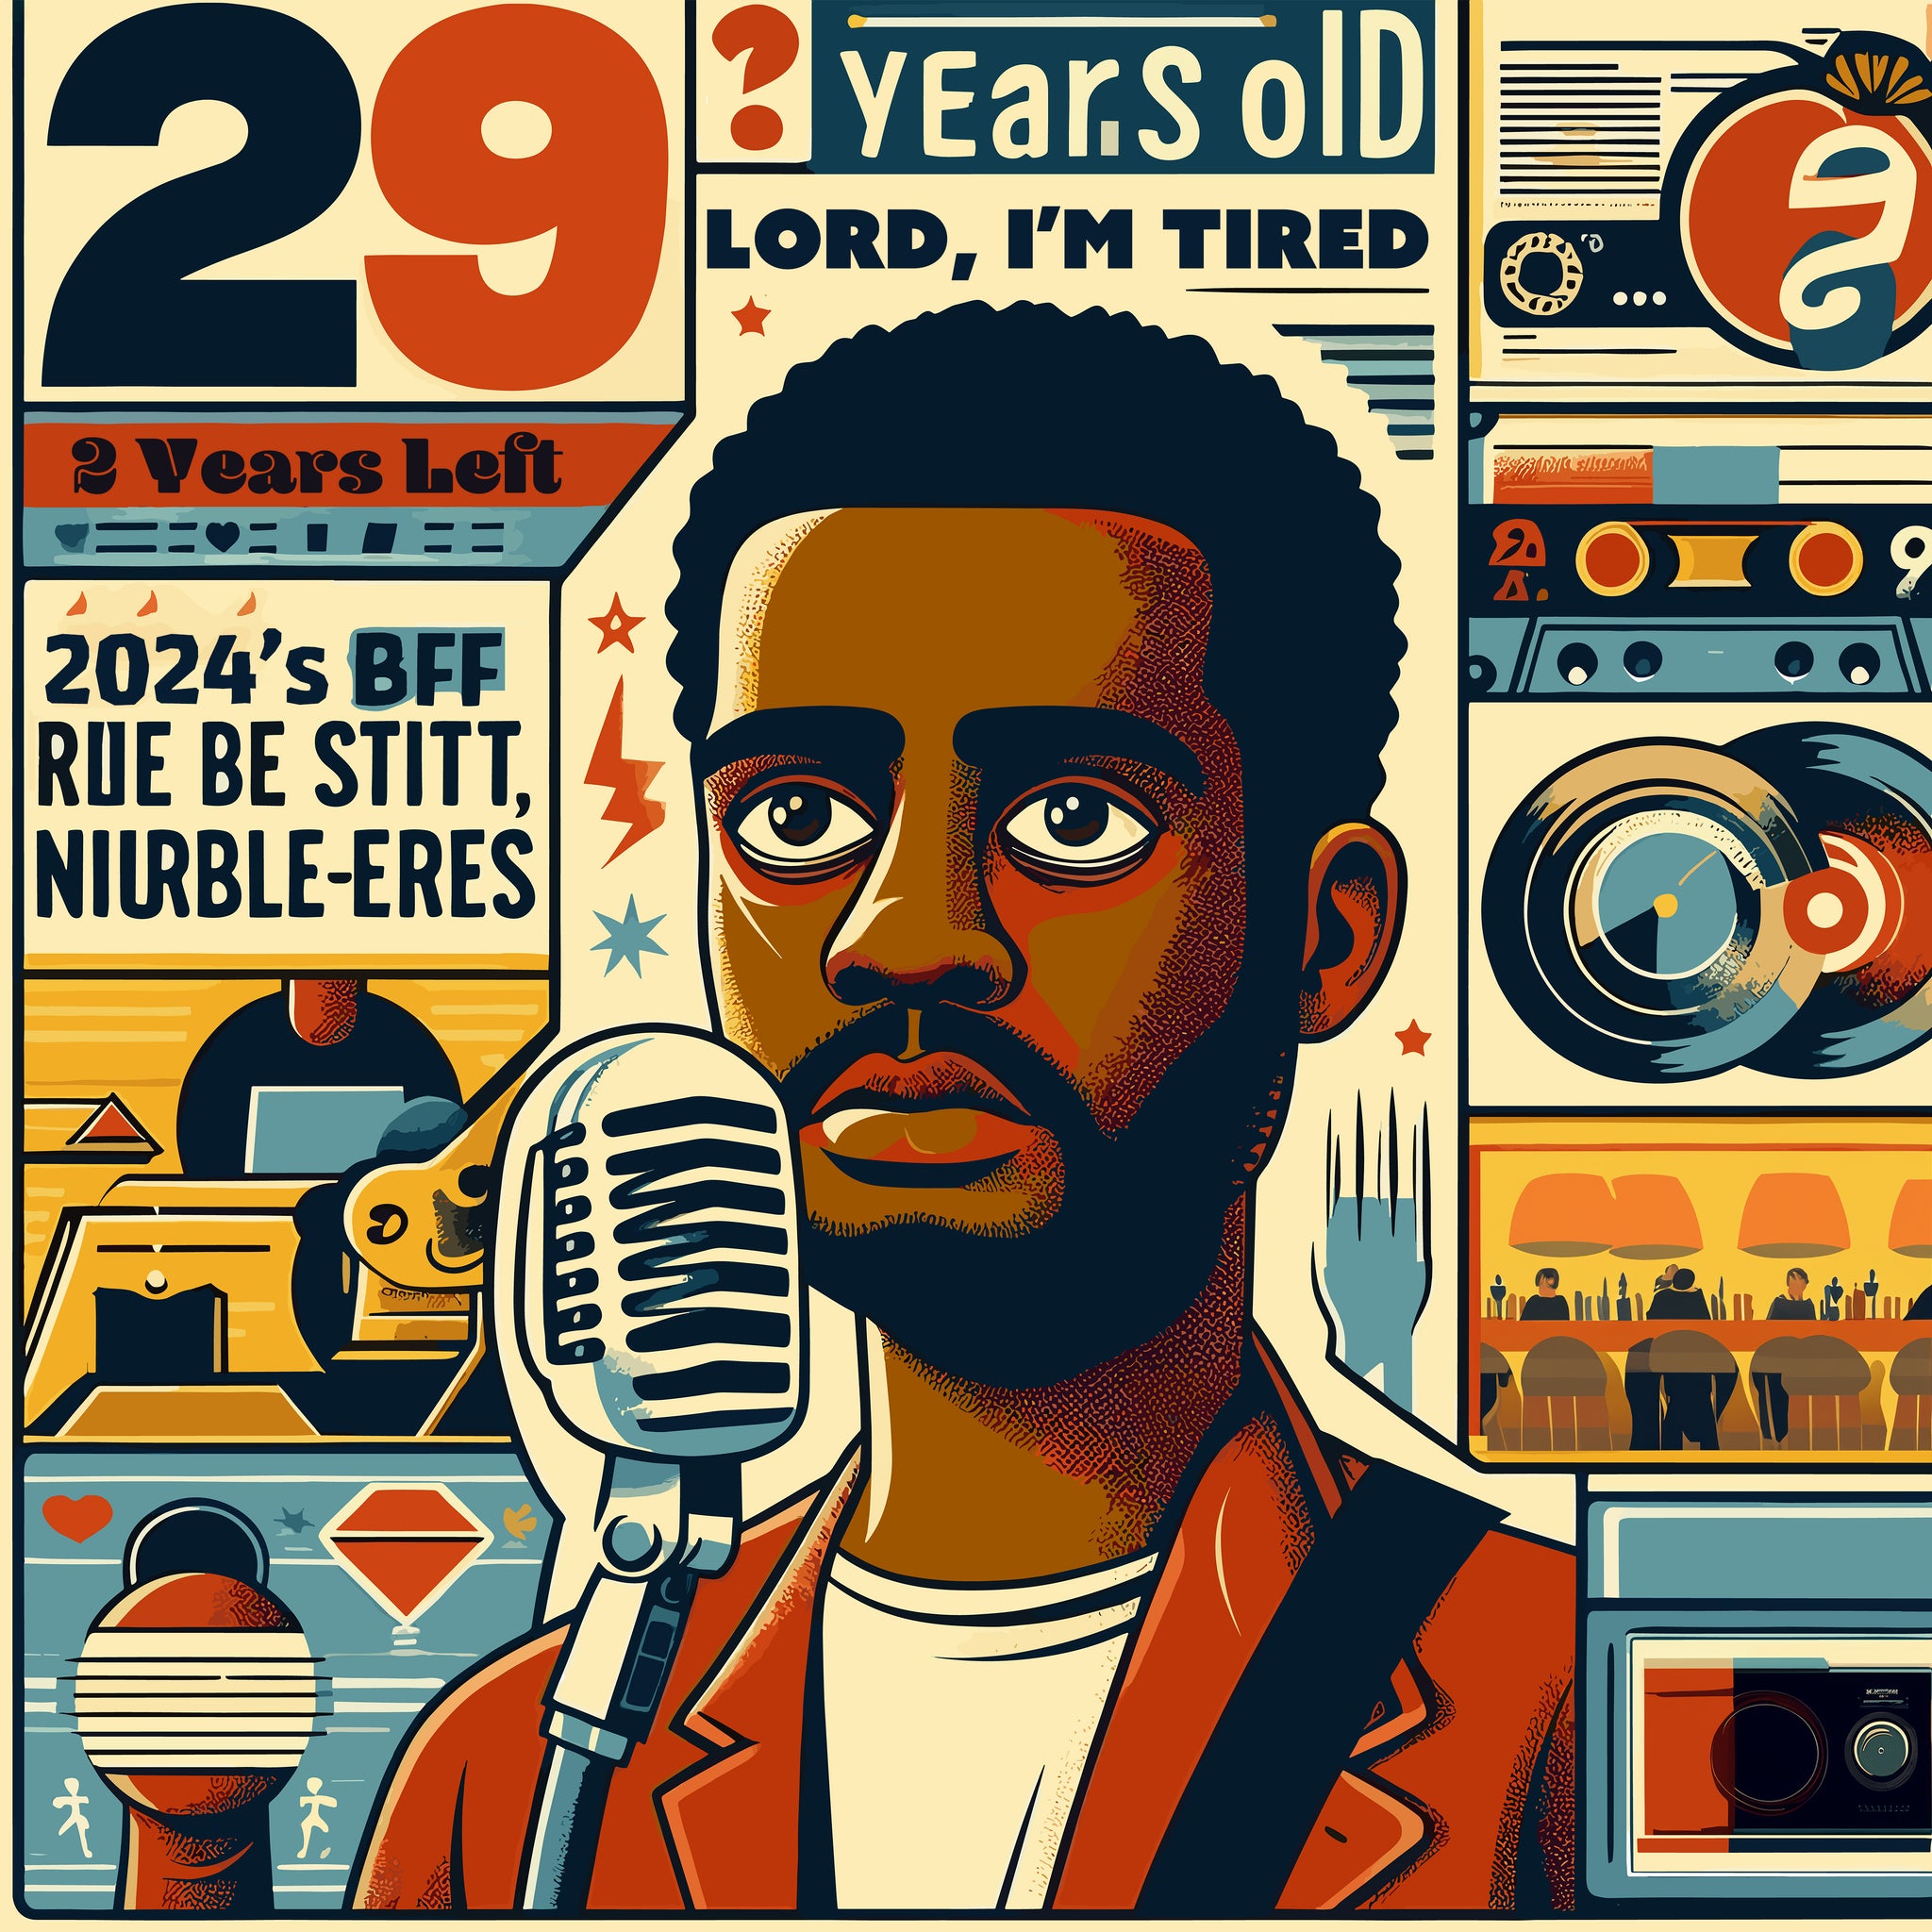 Cover art for Naji's single, 29. Retro yellow, red and blue coloring, featuring illustrated black man with short afro, large 29 in the top left corner.